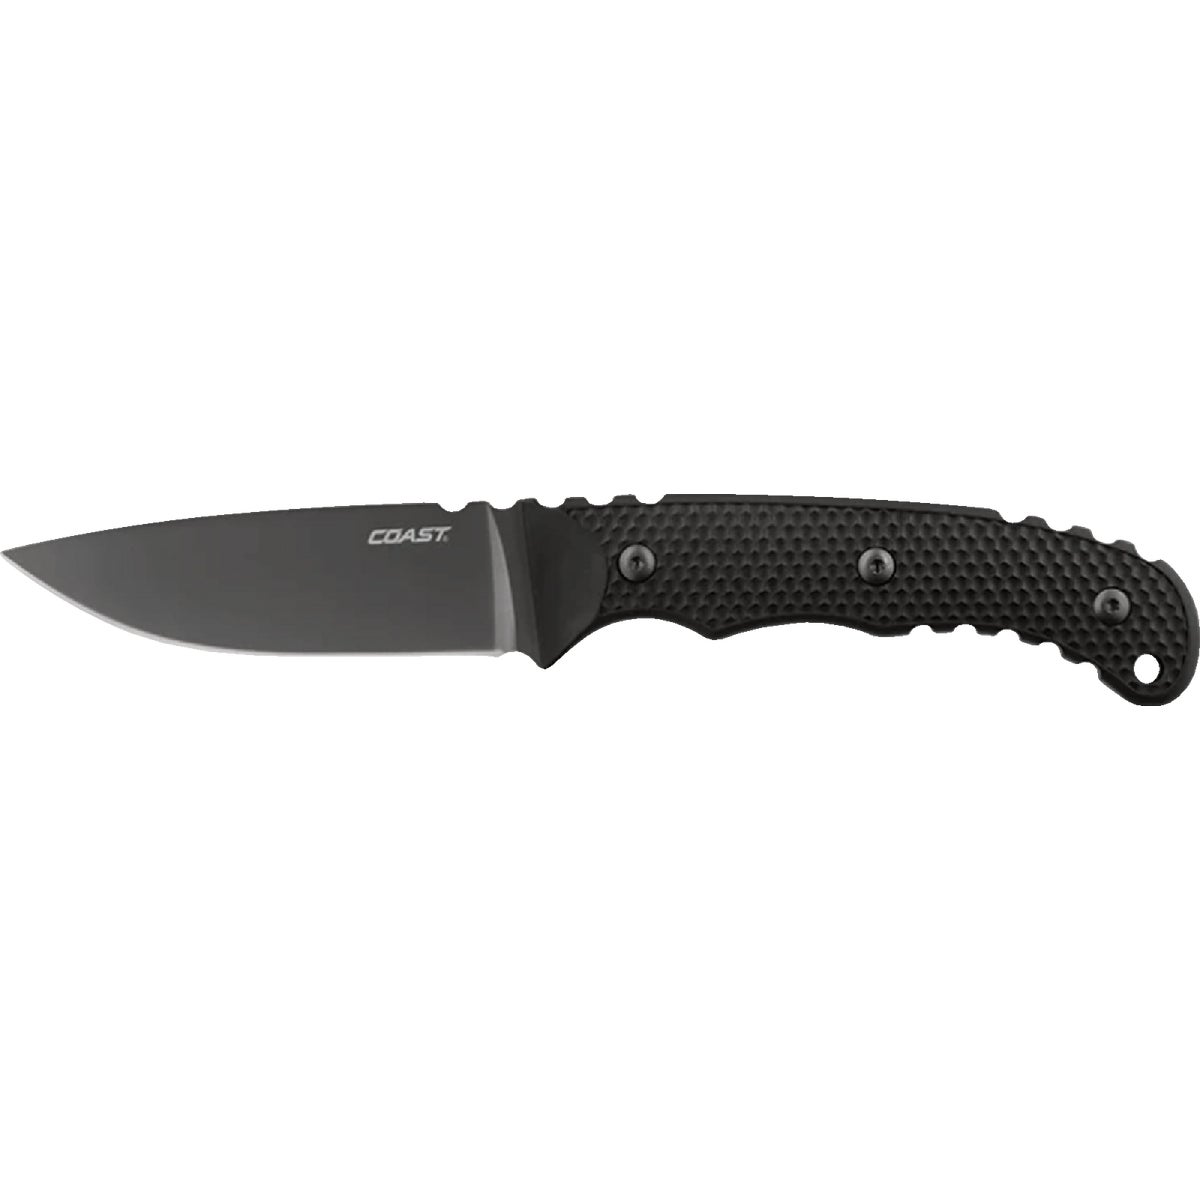 Coast F402 4 In. Stainless Steel Fixed Blade Knife